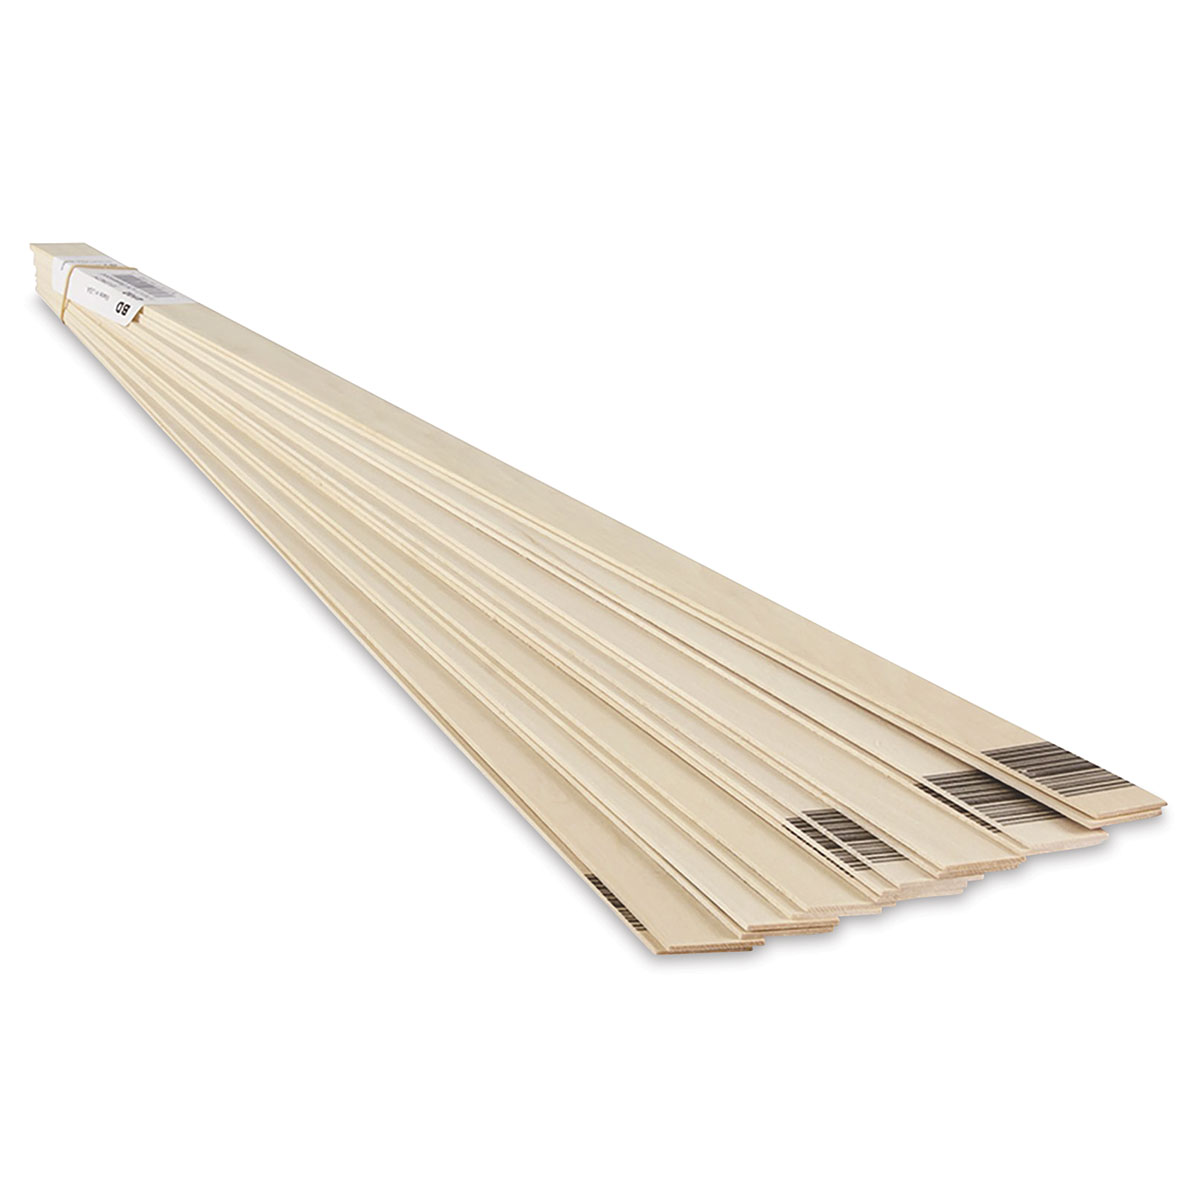 Midwest Basswood Strip 1/8 x 1/4 x 24 in. (30 Pieces)30